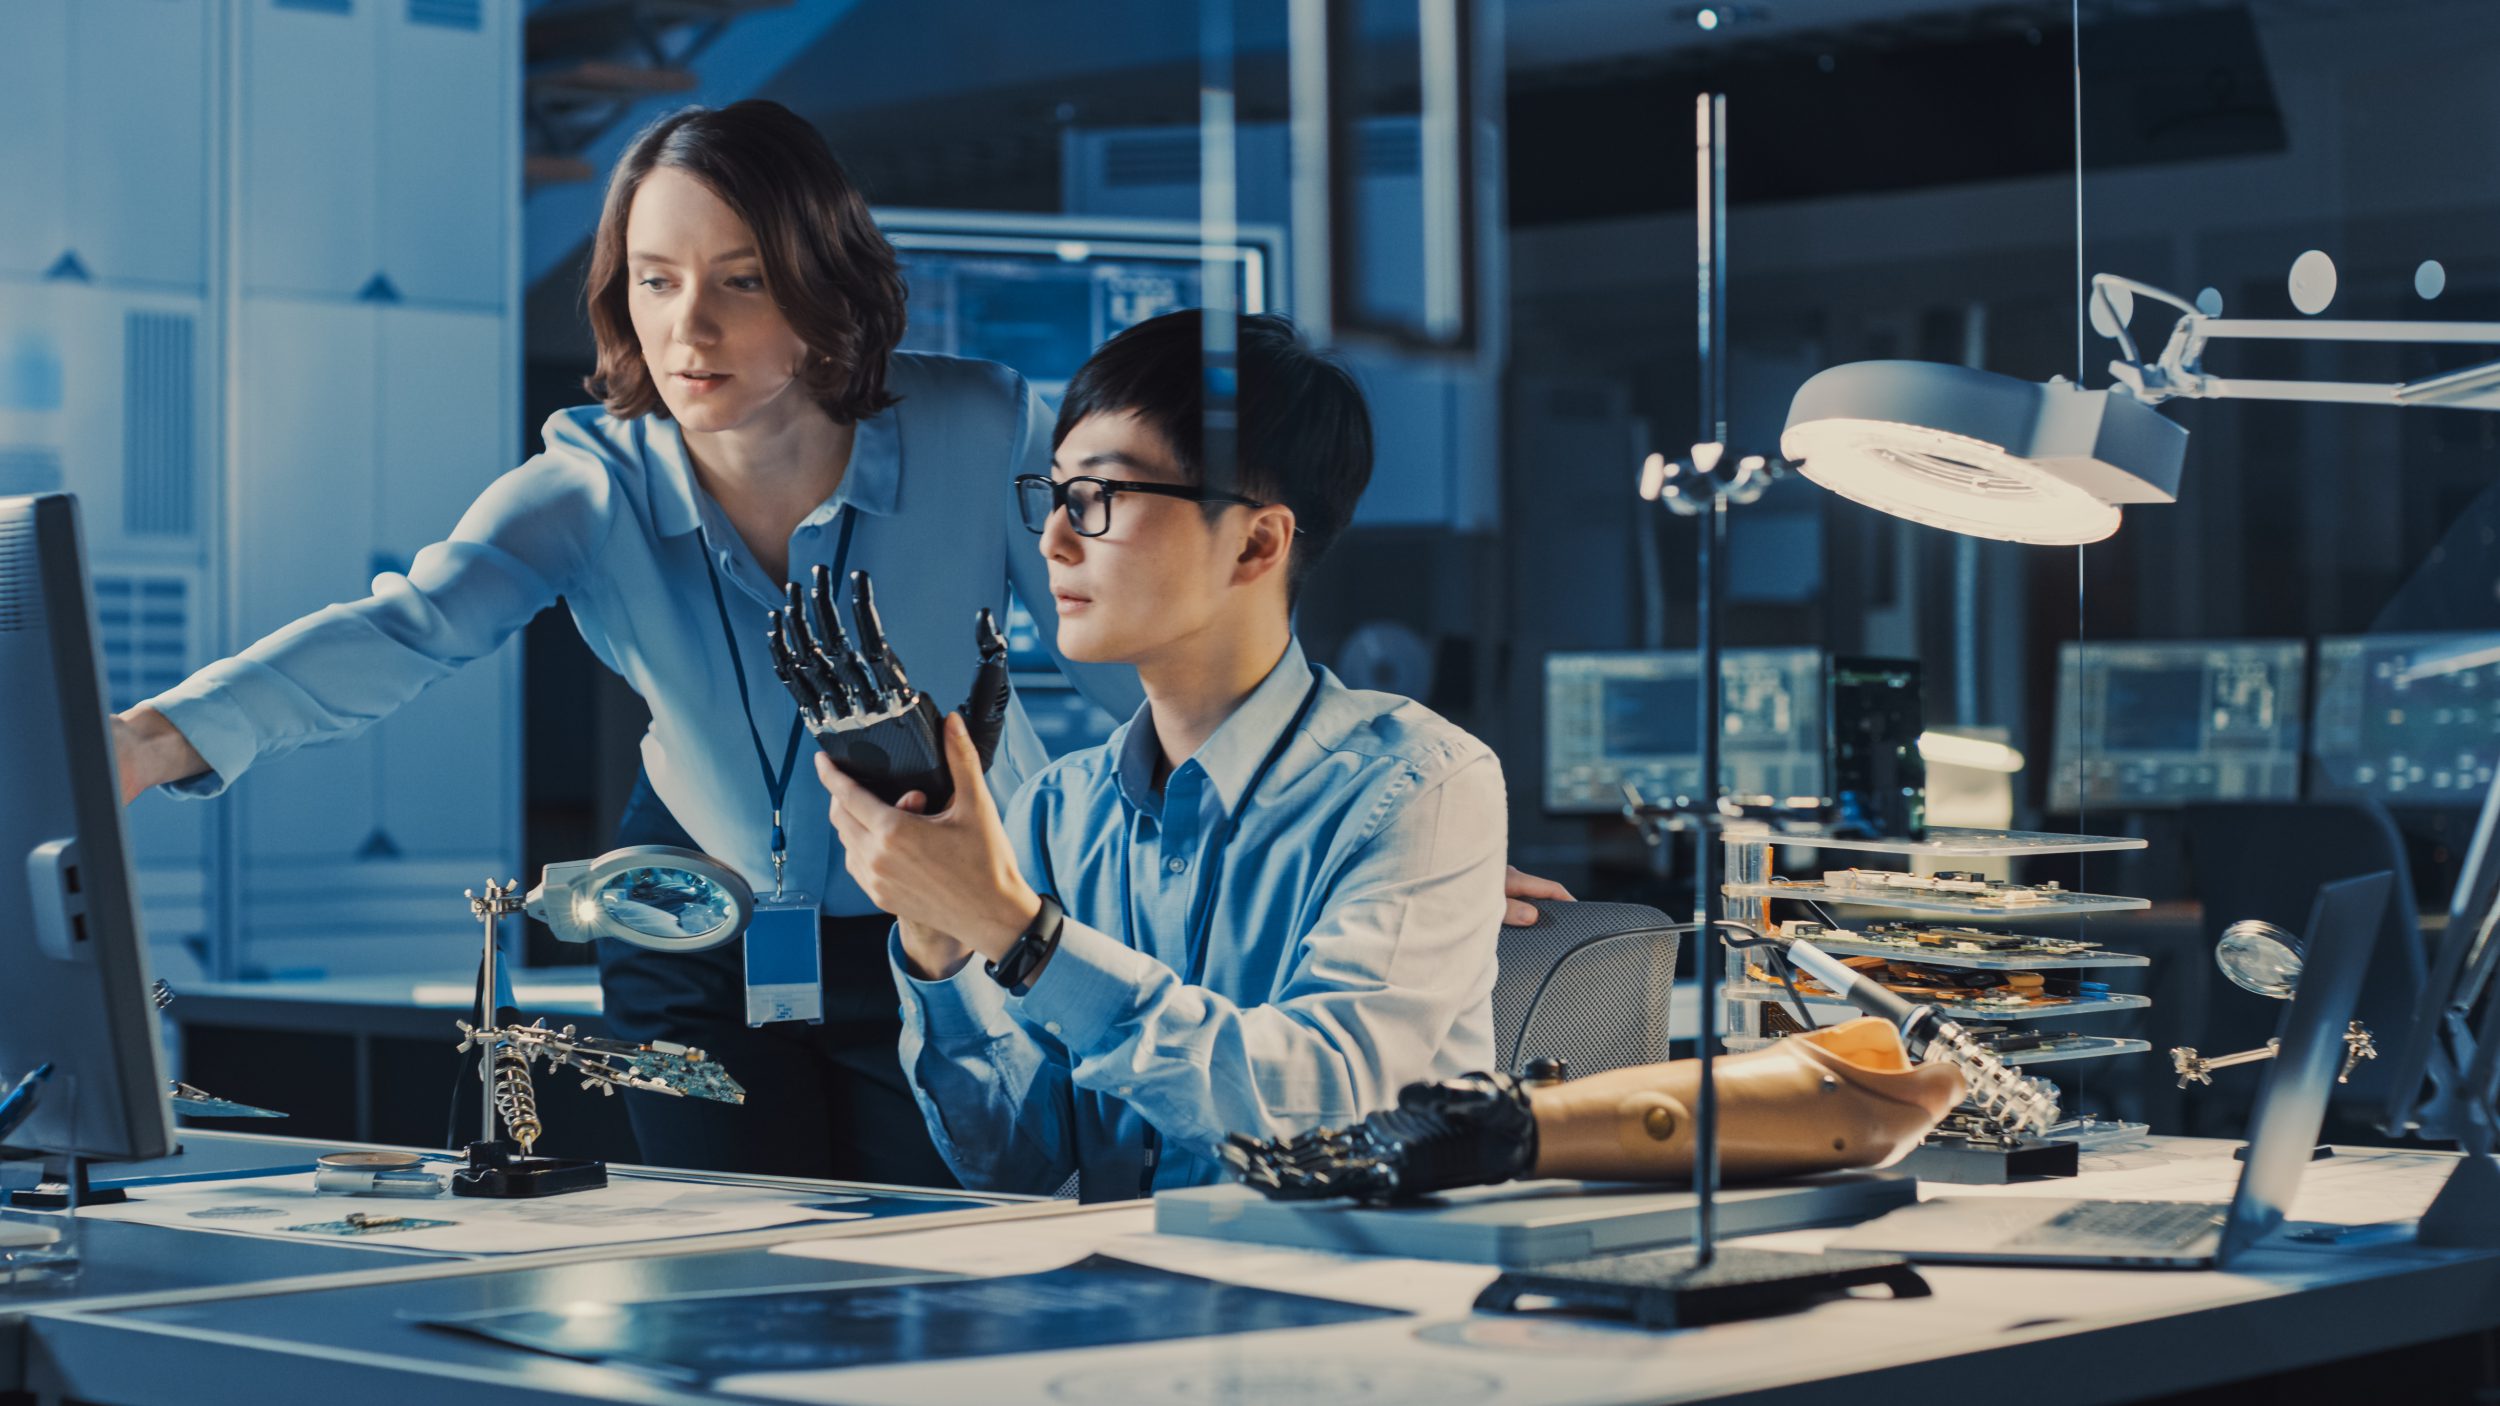 Technological Prosthetic Robot Arm is Tested by Two Professional Development Engineers in a High Tech Research Laboratory with Modern Futuristic medical device to be government ready